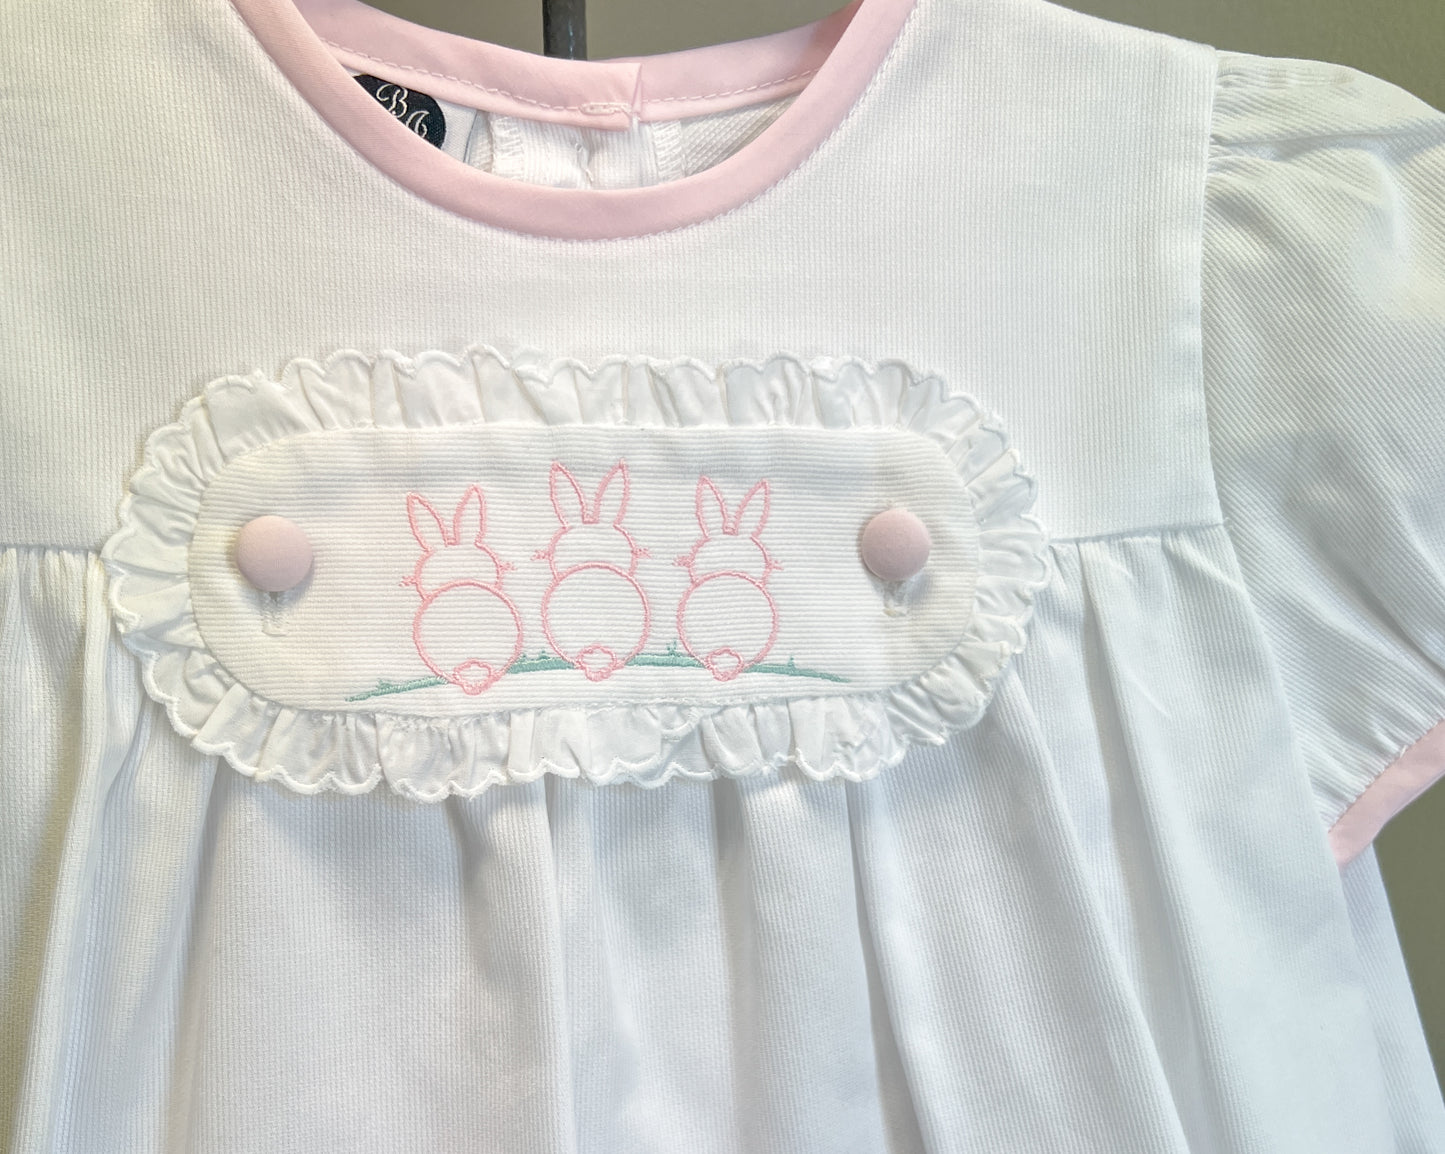 Lilly top w/ bunny tab + bloomers with lace - 2t